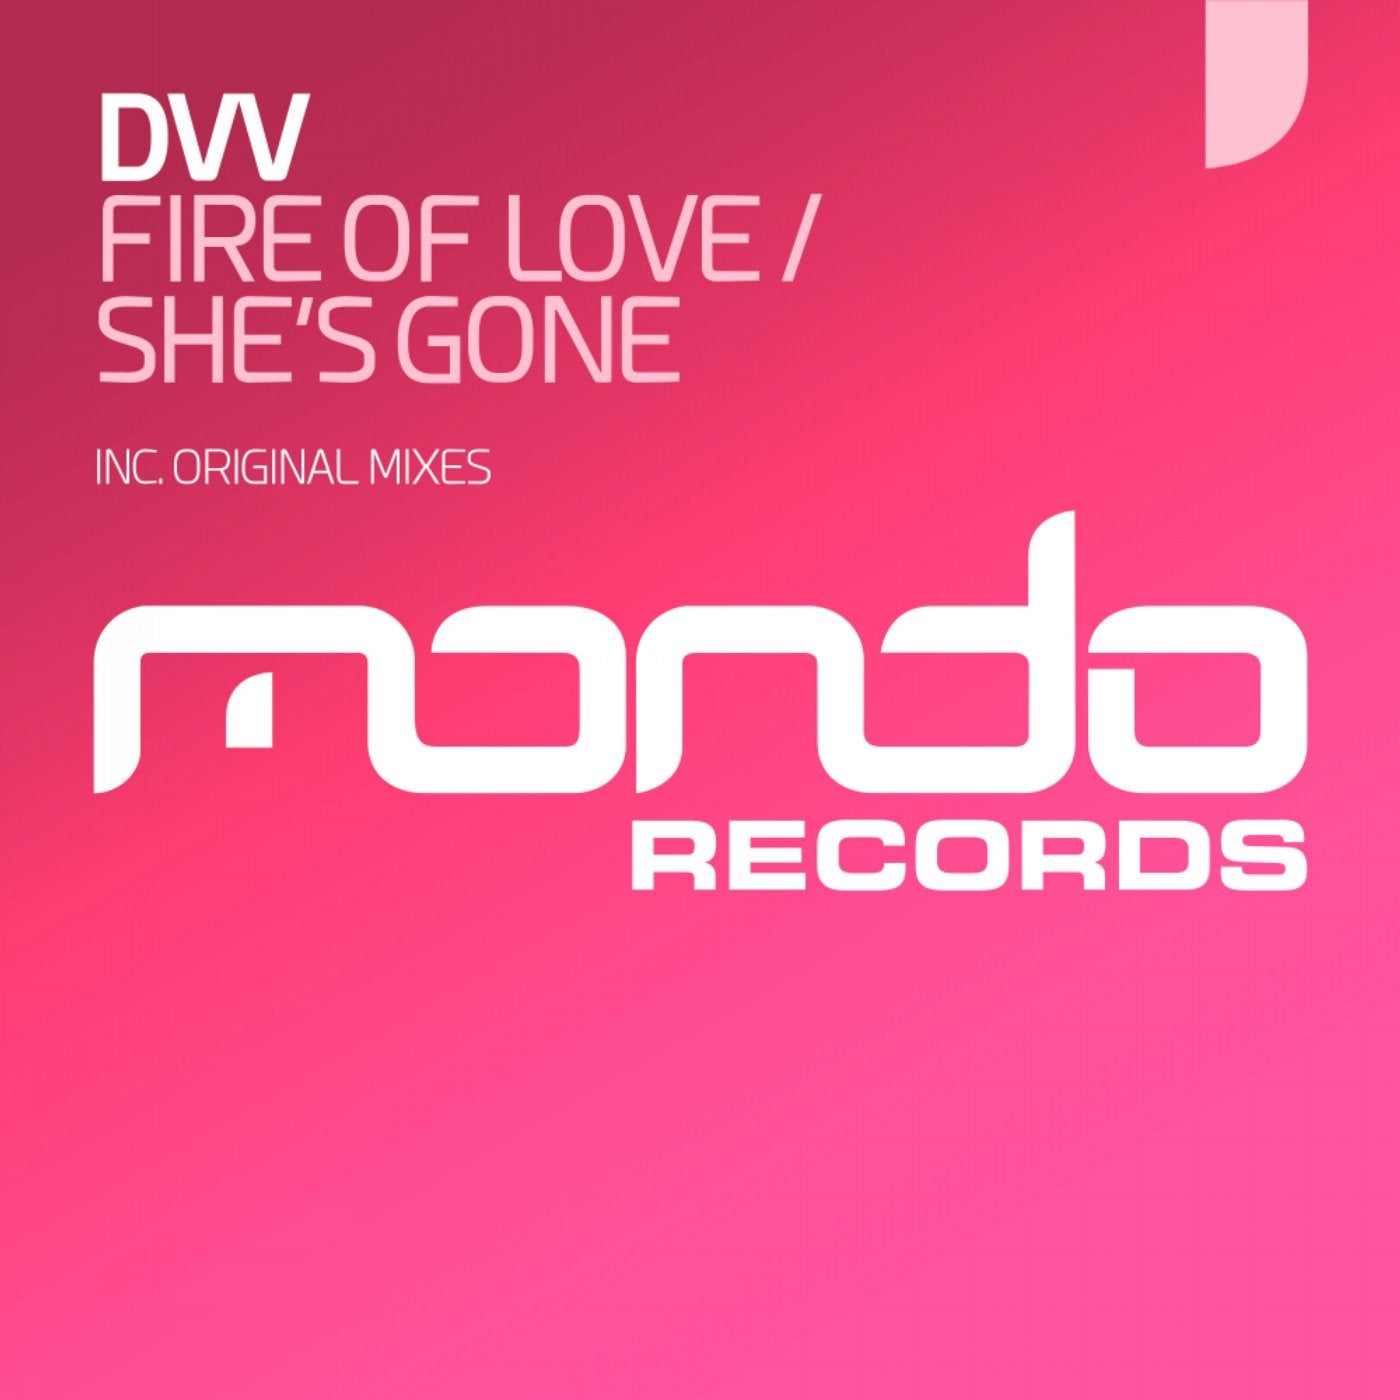 Fire of Love EP